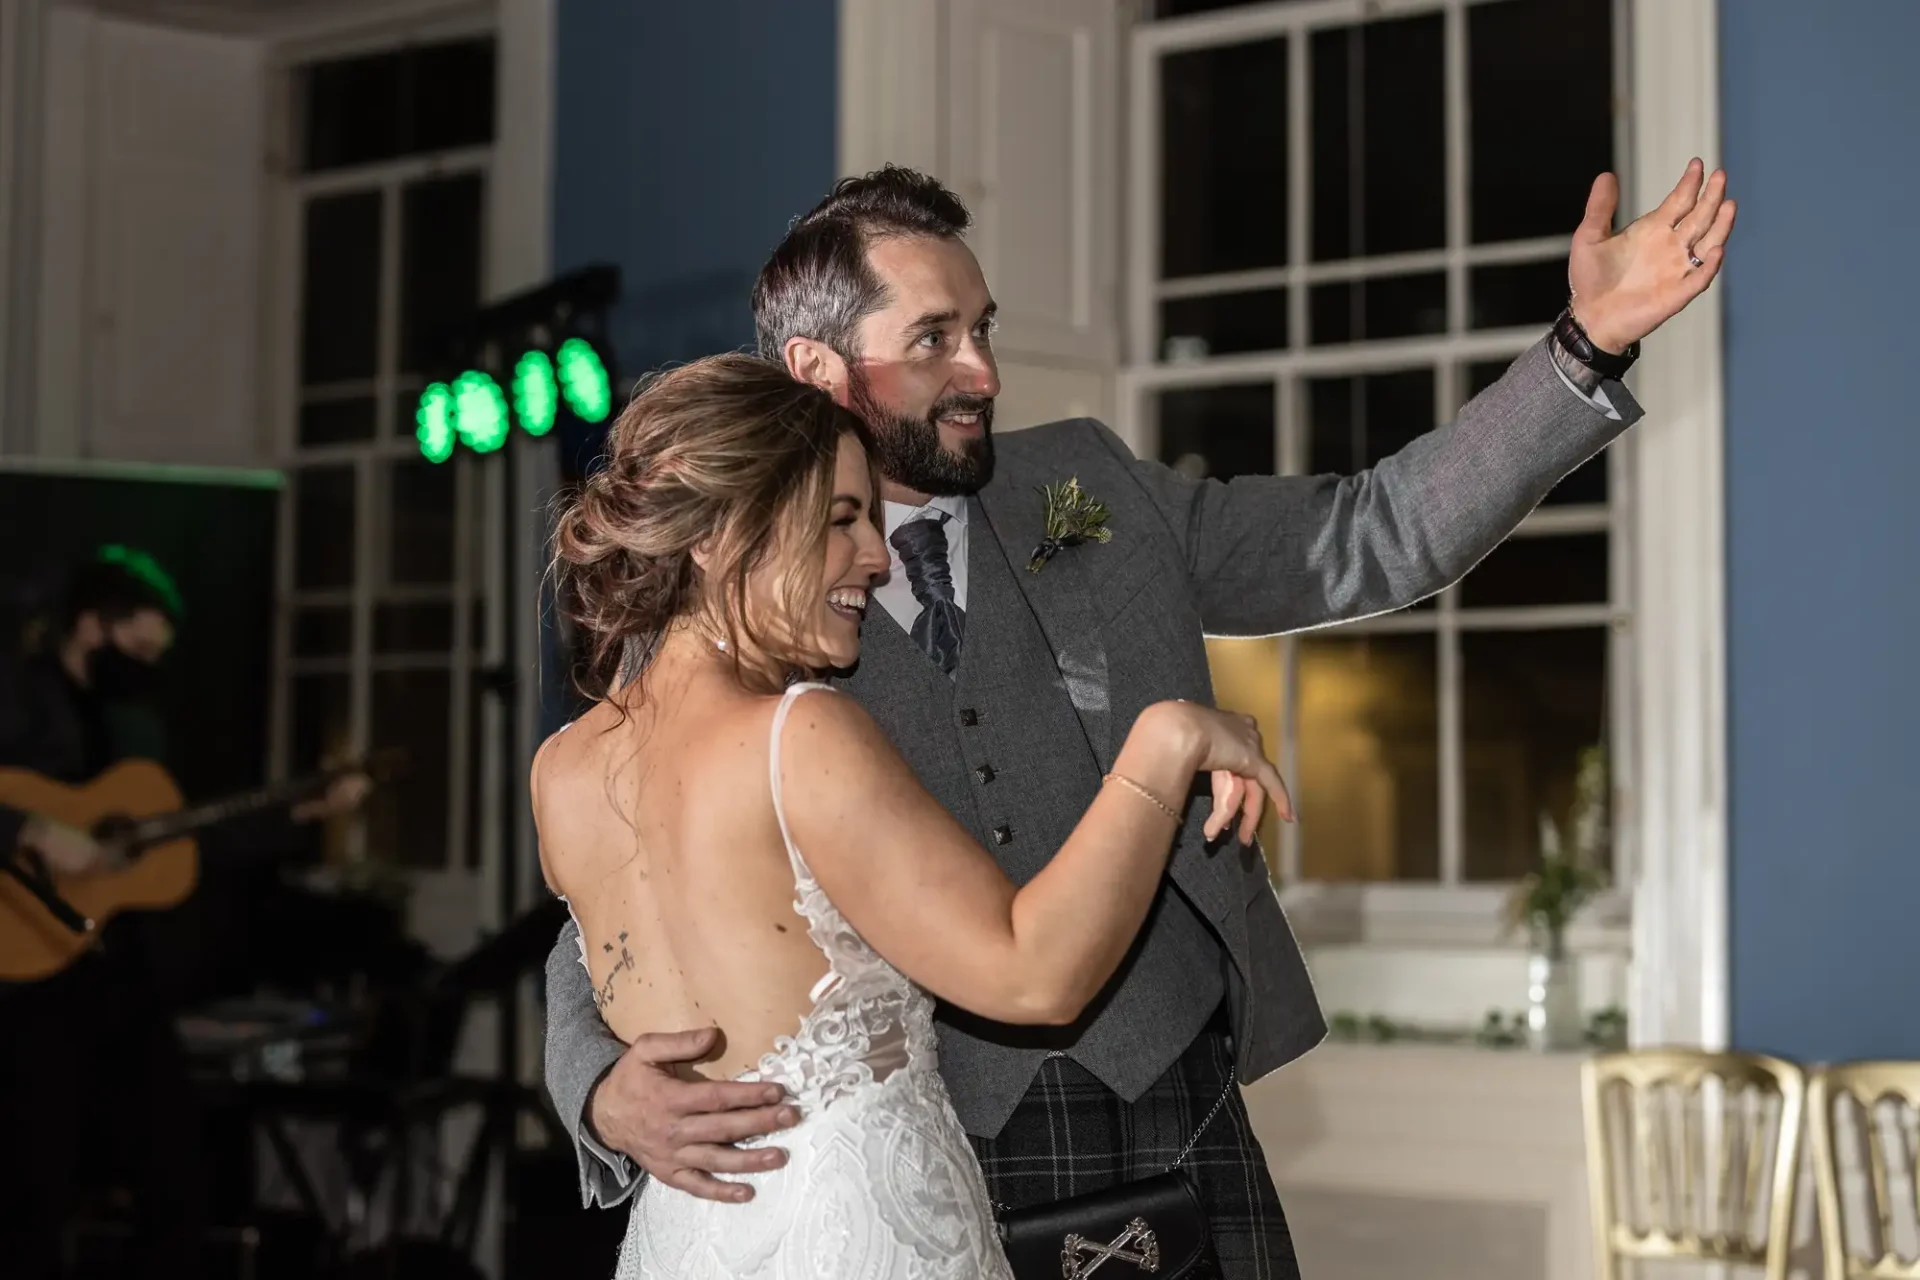 A bride and groom dancing joyfully at their wedding reception, the groom gesturing with one arm as a band plays in the background.